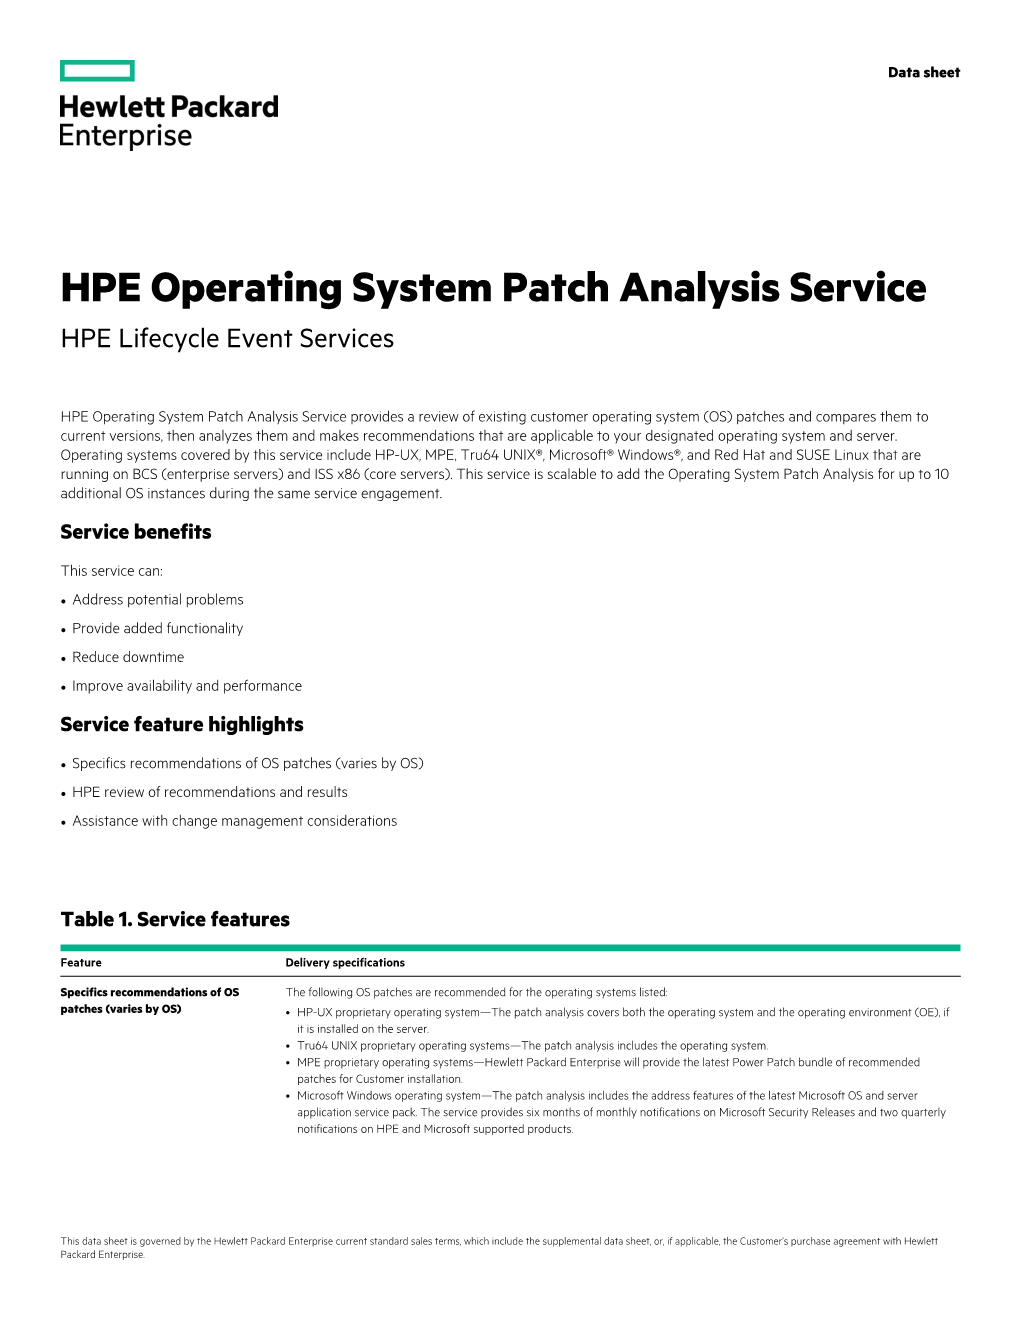 HPE Operating System Patch Analysis Service HPE Lifecycle Event Services